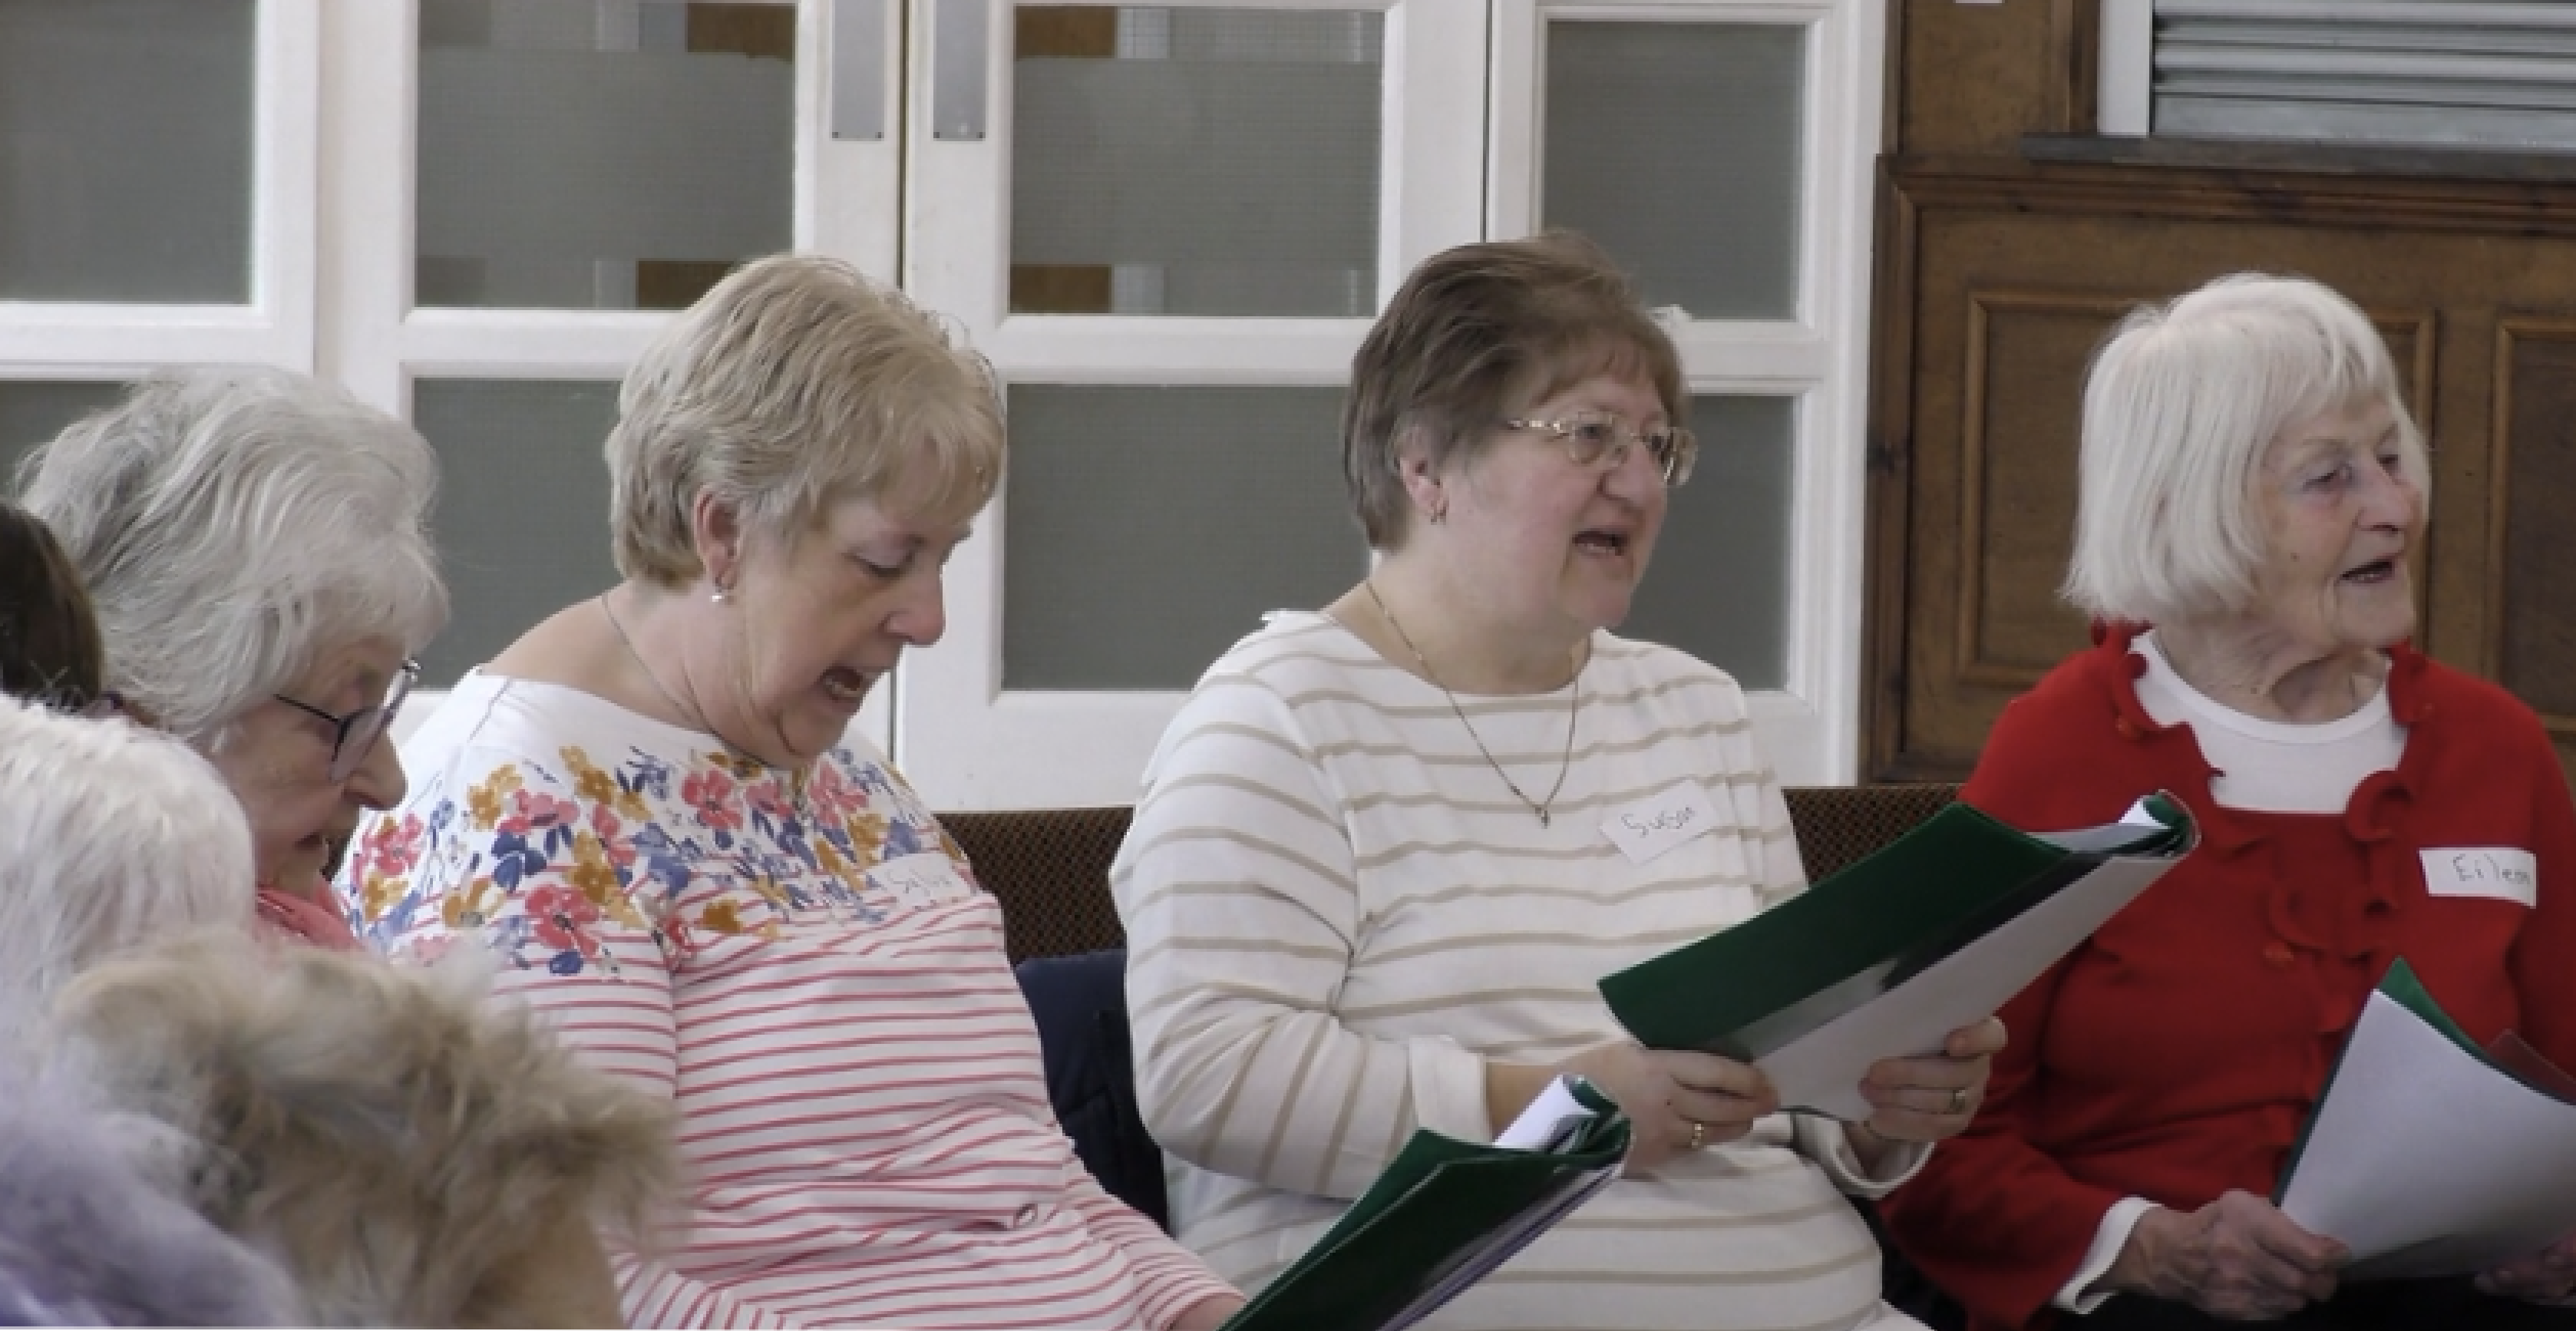 Breaking through the dementia ‘fog’ with singing sessions